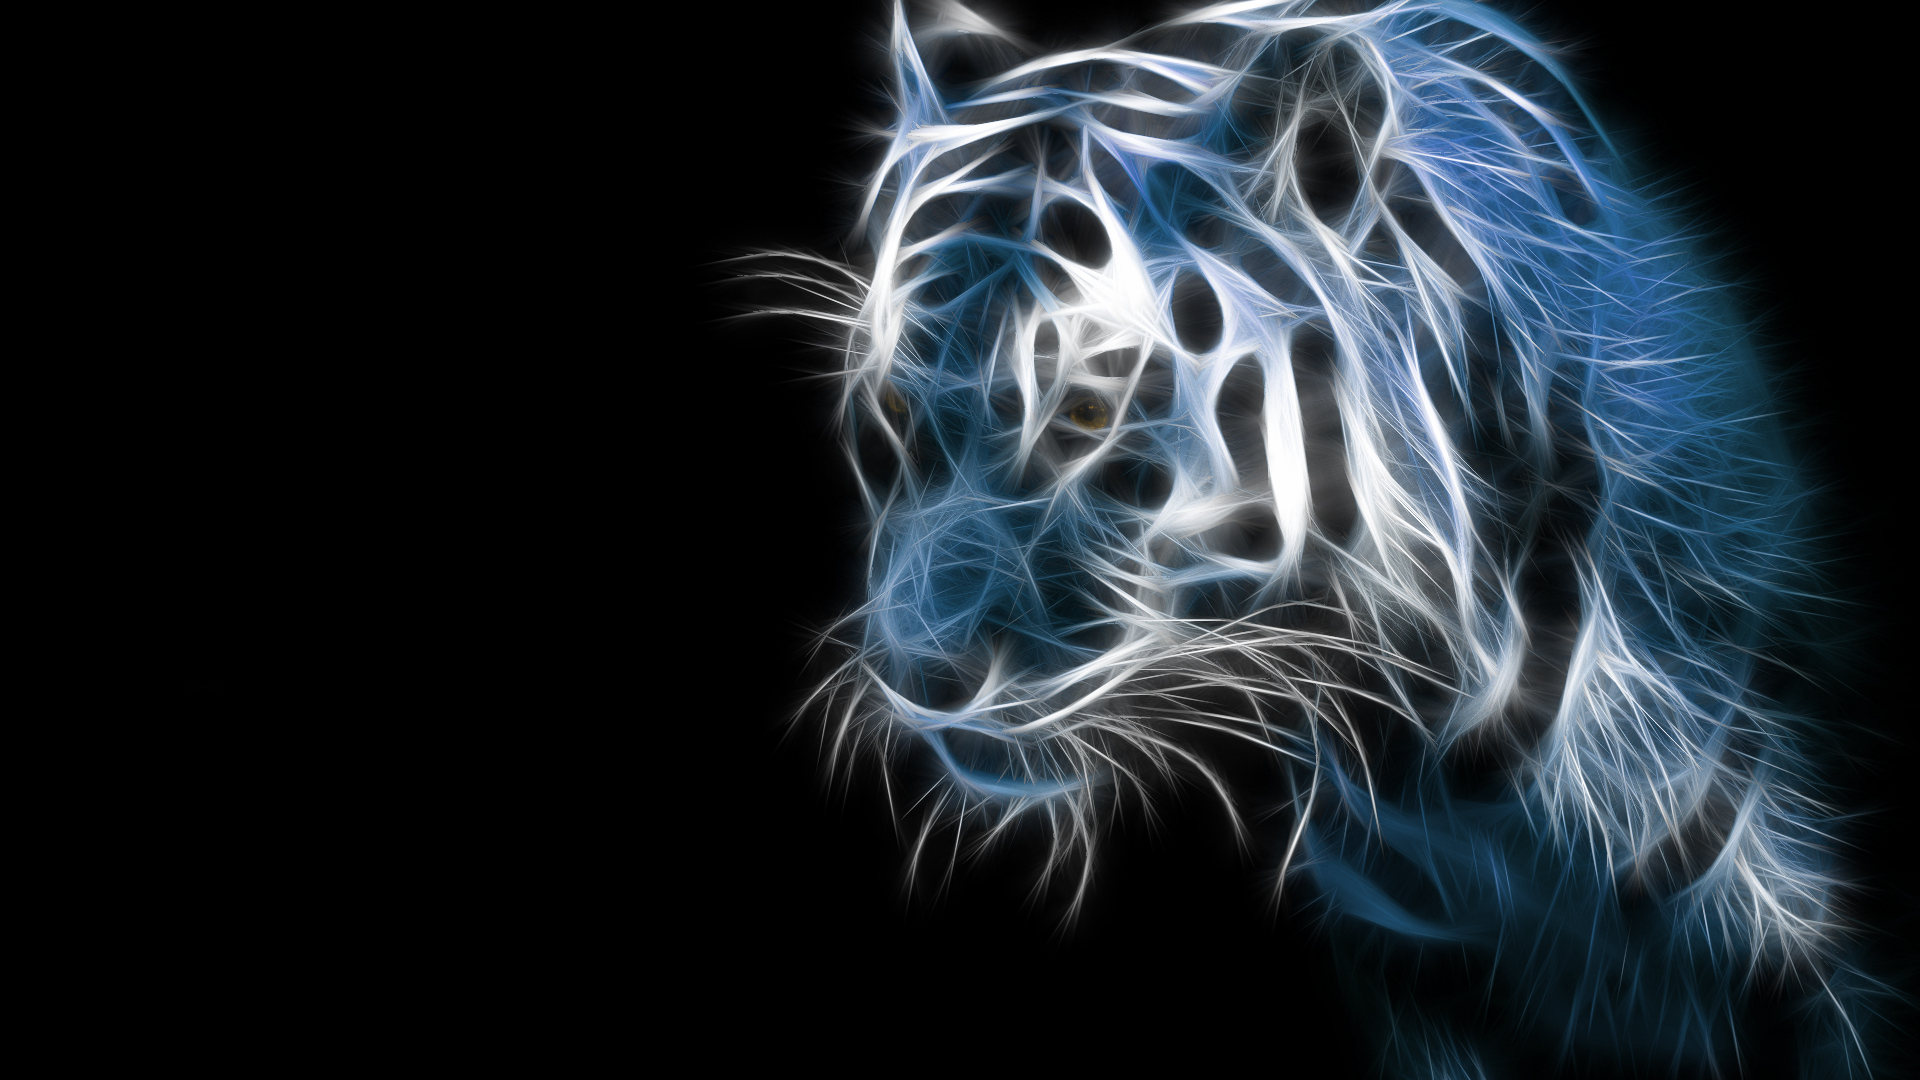 Tiger HD Wallpapers Free Download   Tremendous Wallpapers